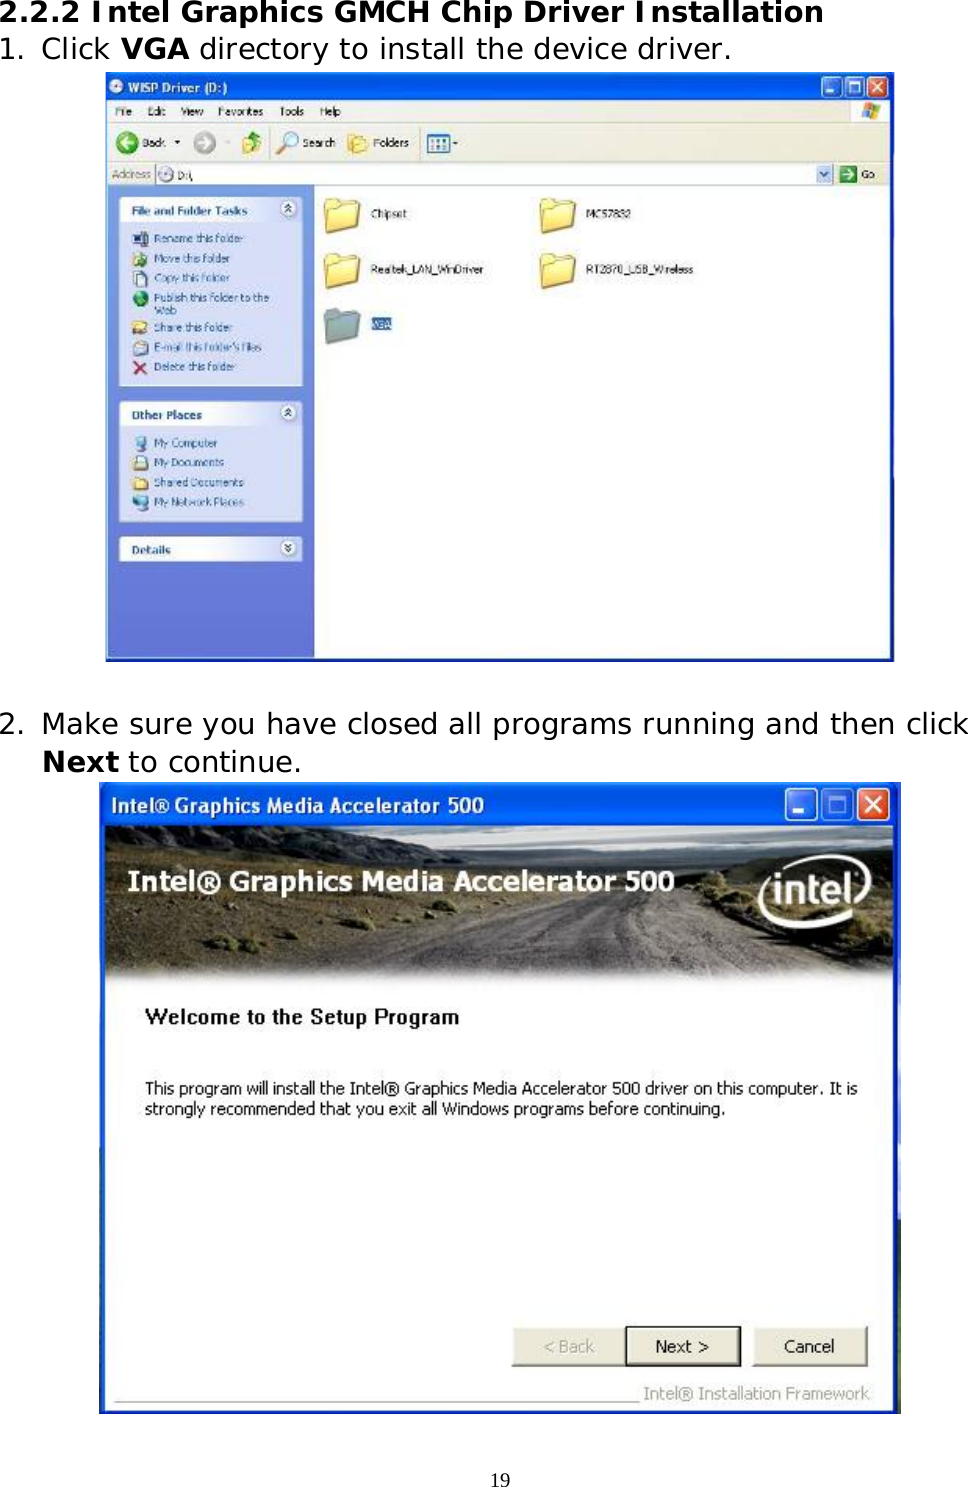  19 2.2.2 Intel Graphics GMCH Chip Driver Installation 1. Click VGA directory to install the device driver.    2. Make sure you have closed all programs running and then click Next to continue.  